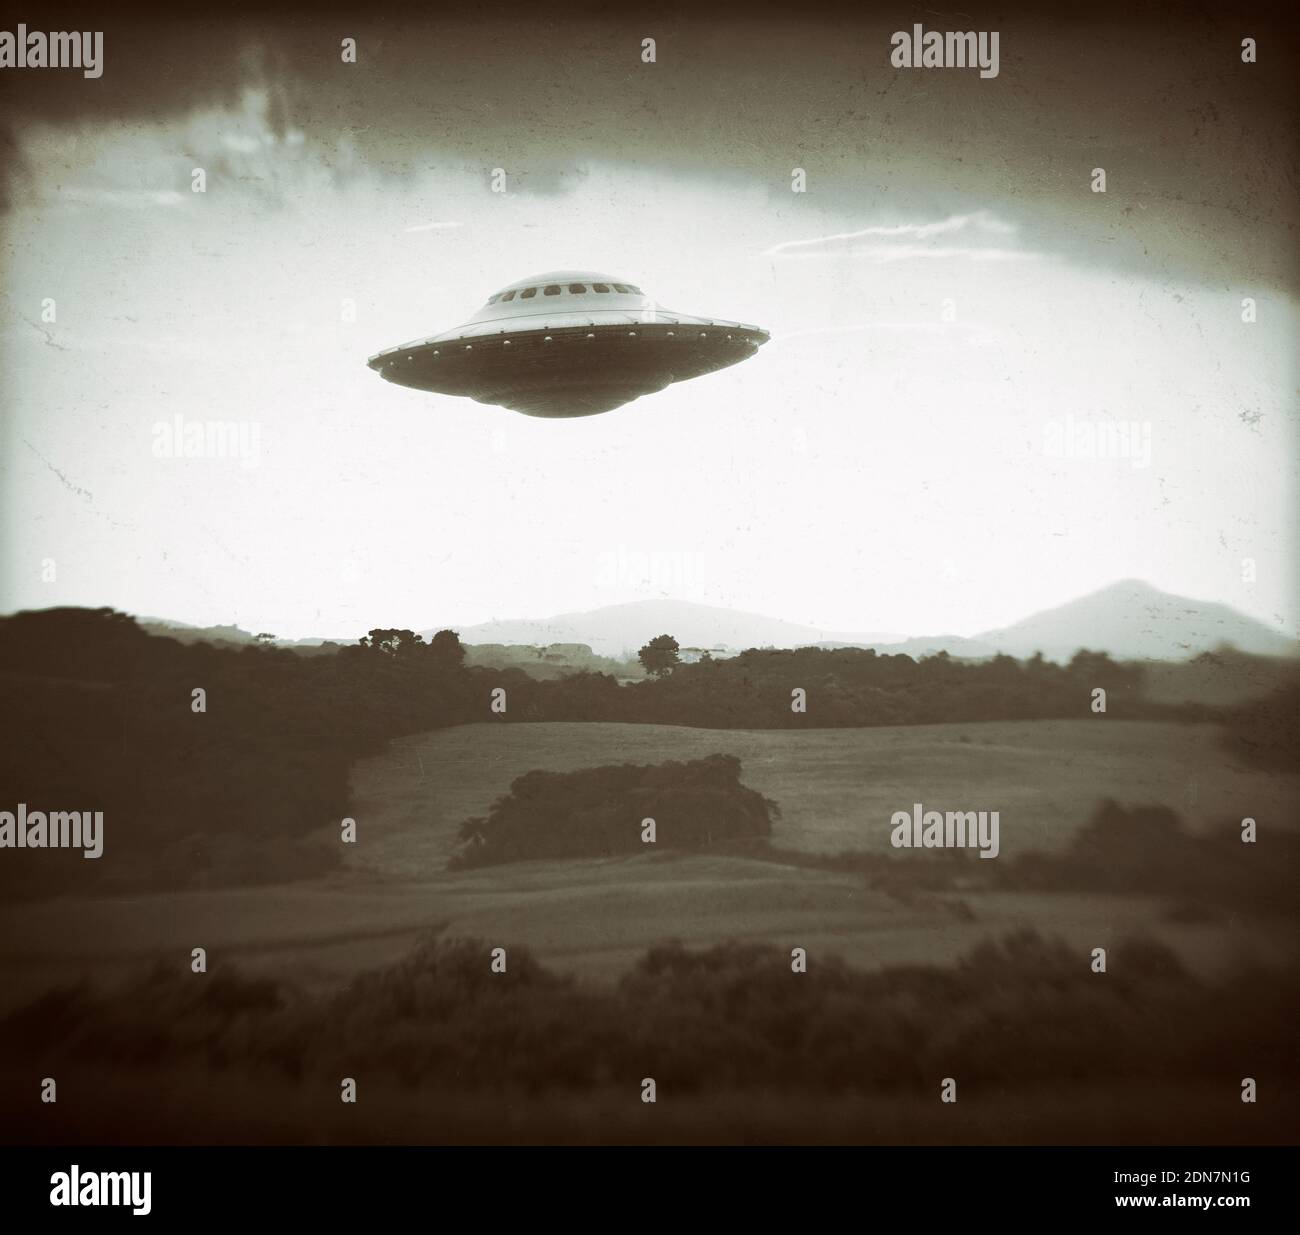 Unidentified Flying Object. Concept of old photo. 3D illustration imitating old photography of UFO. Stock Photo